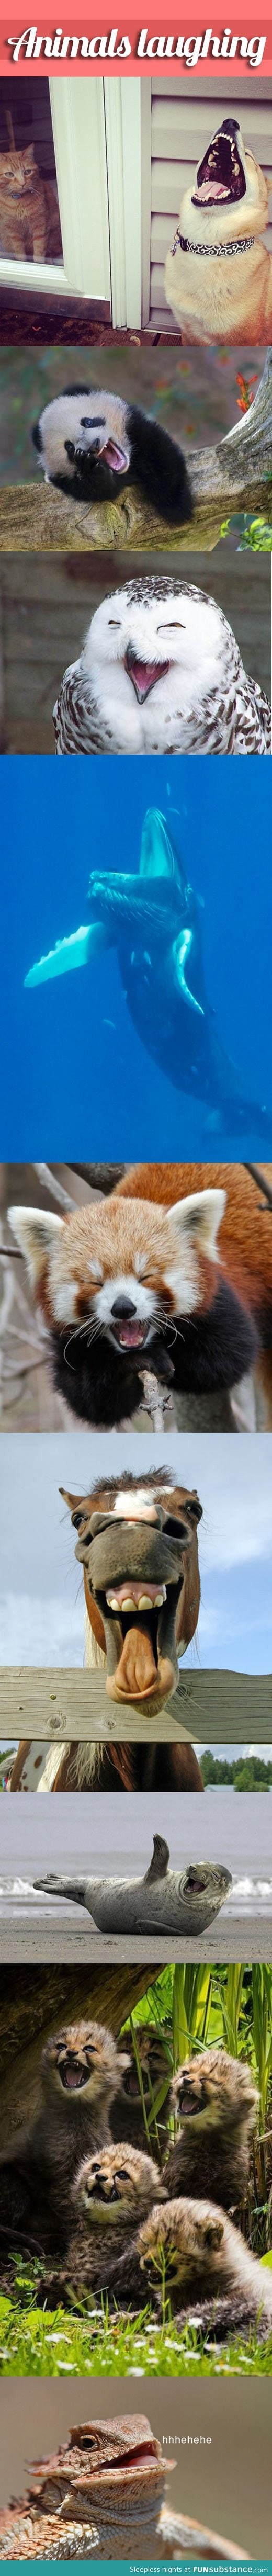 Adorable Animals Laughing